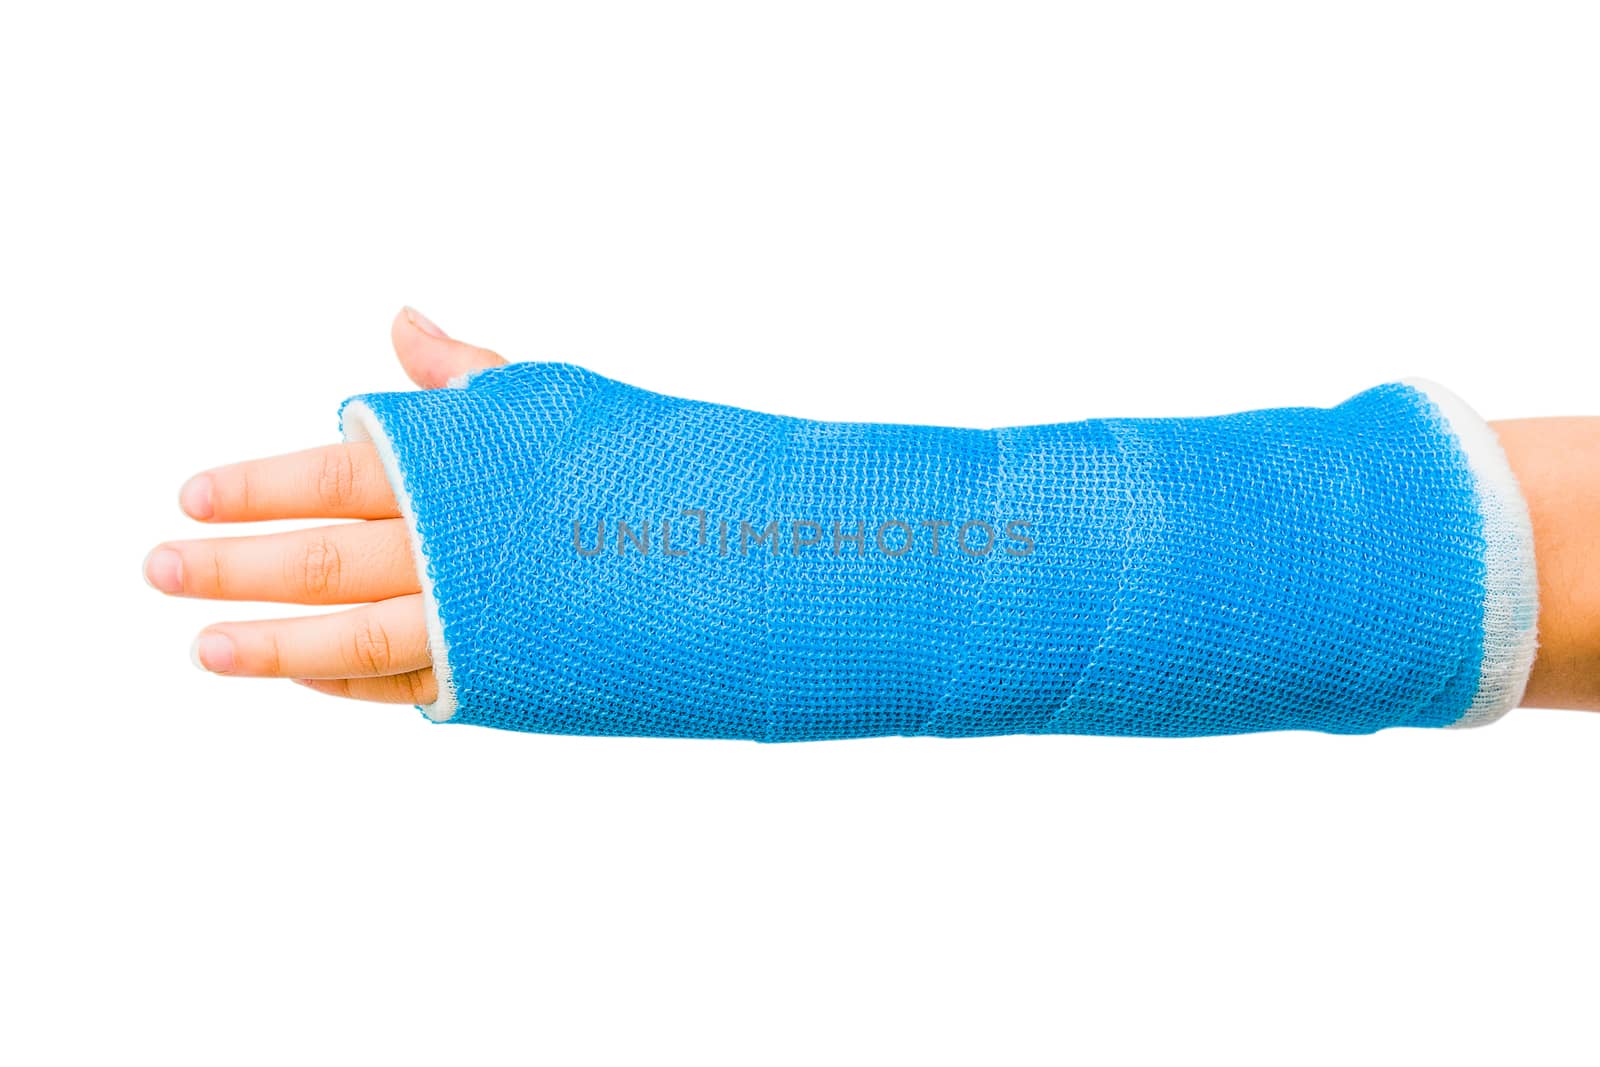 Cast of Child’s Broken Arm Isolated on White Background